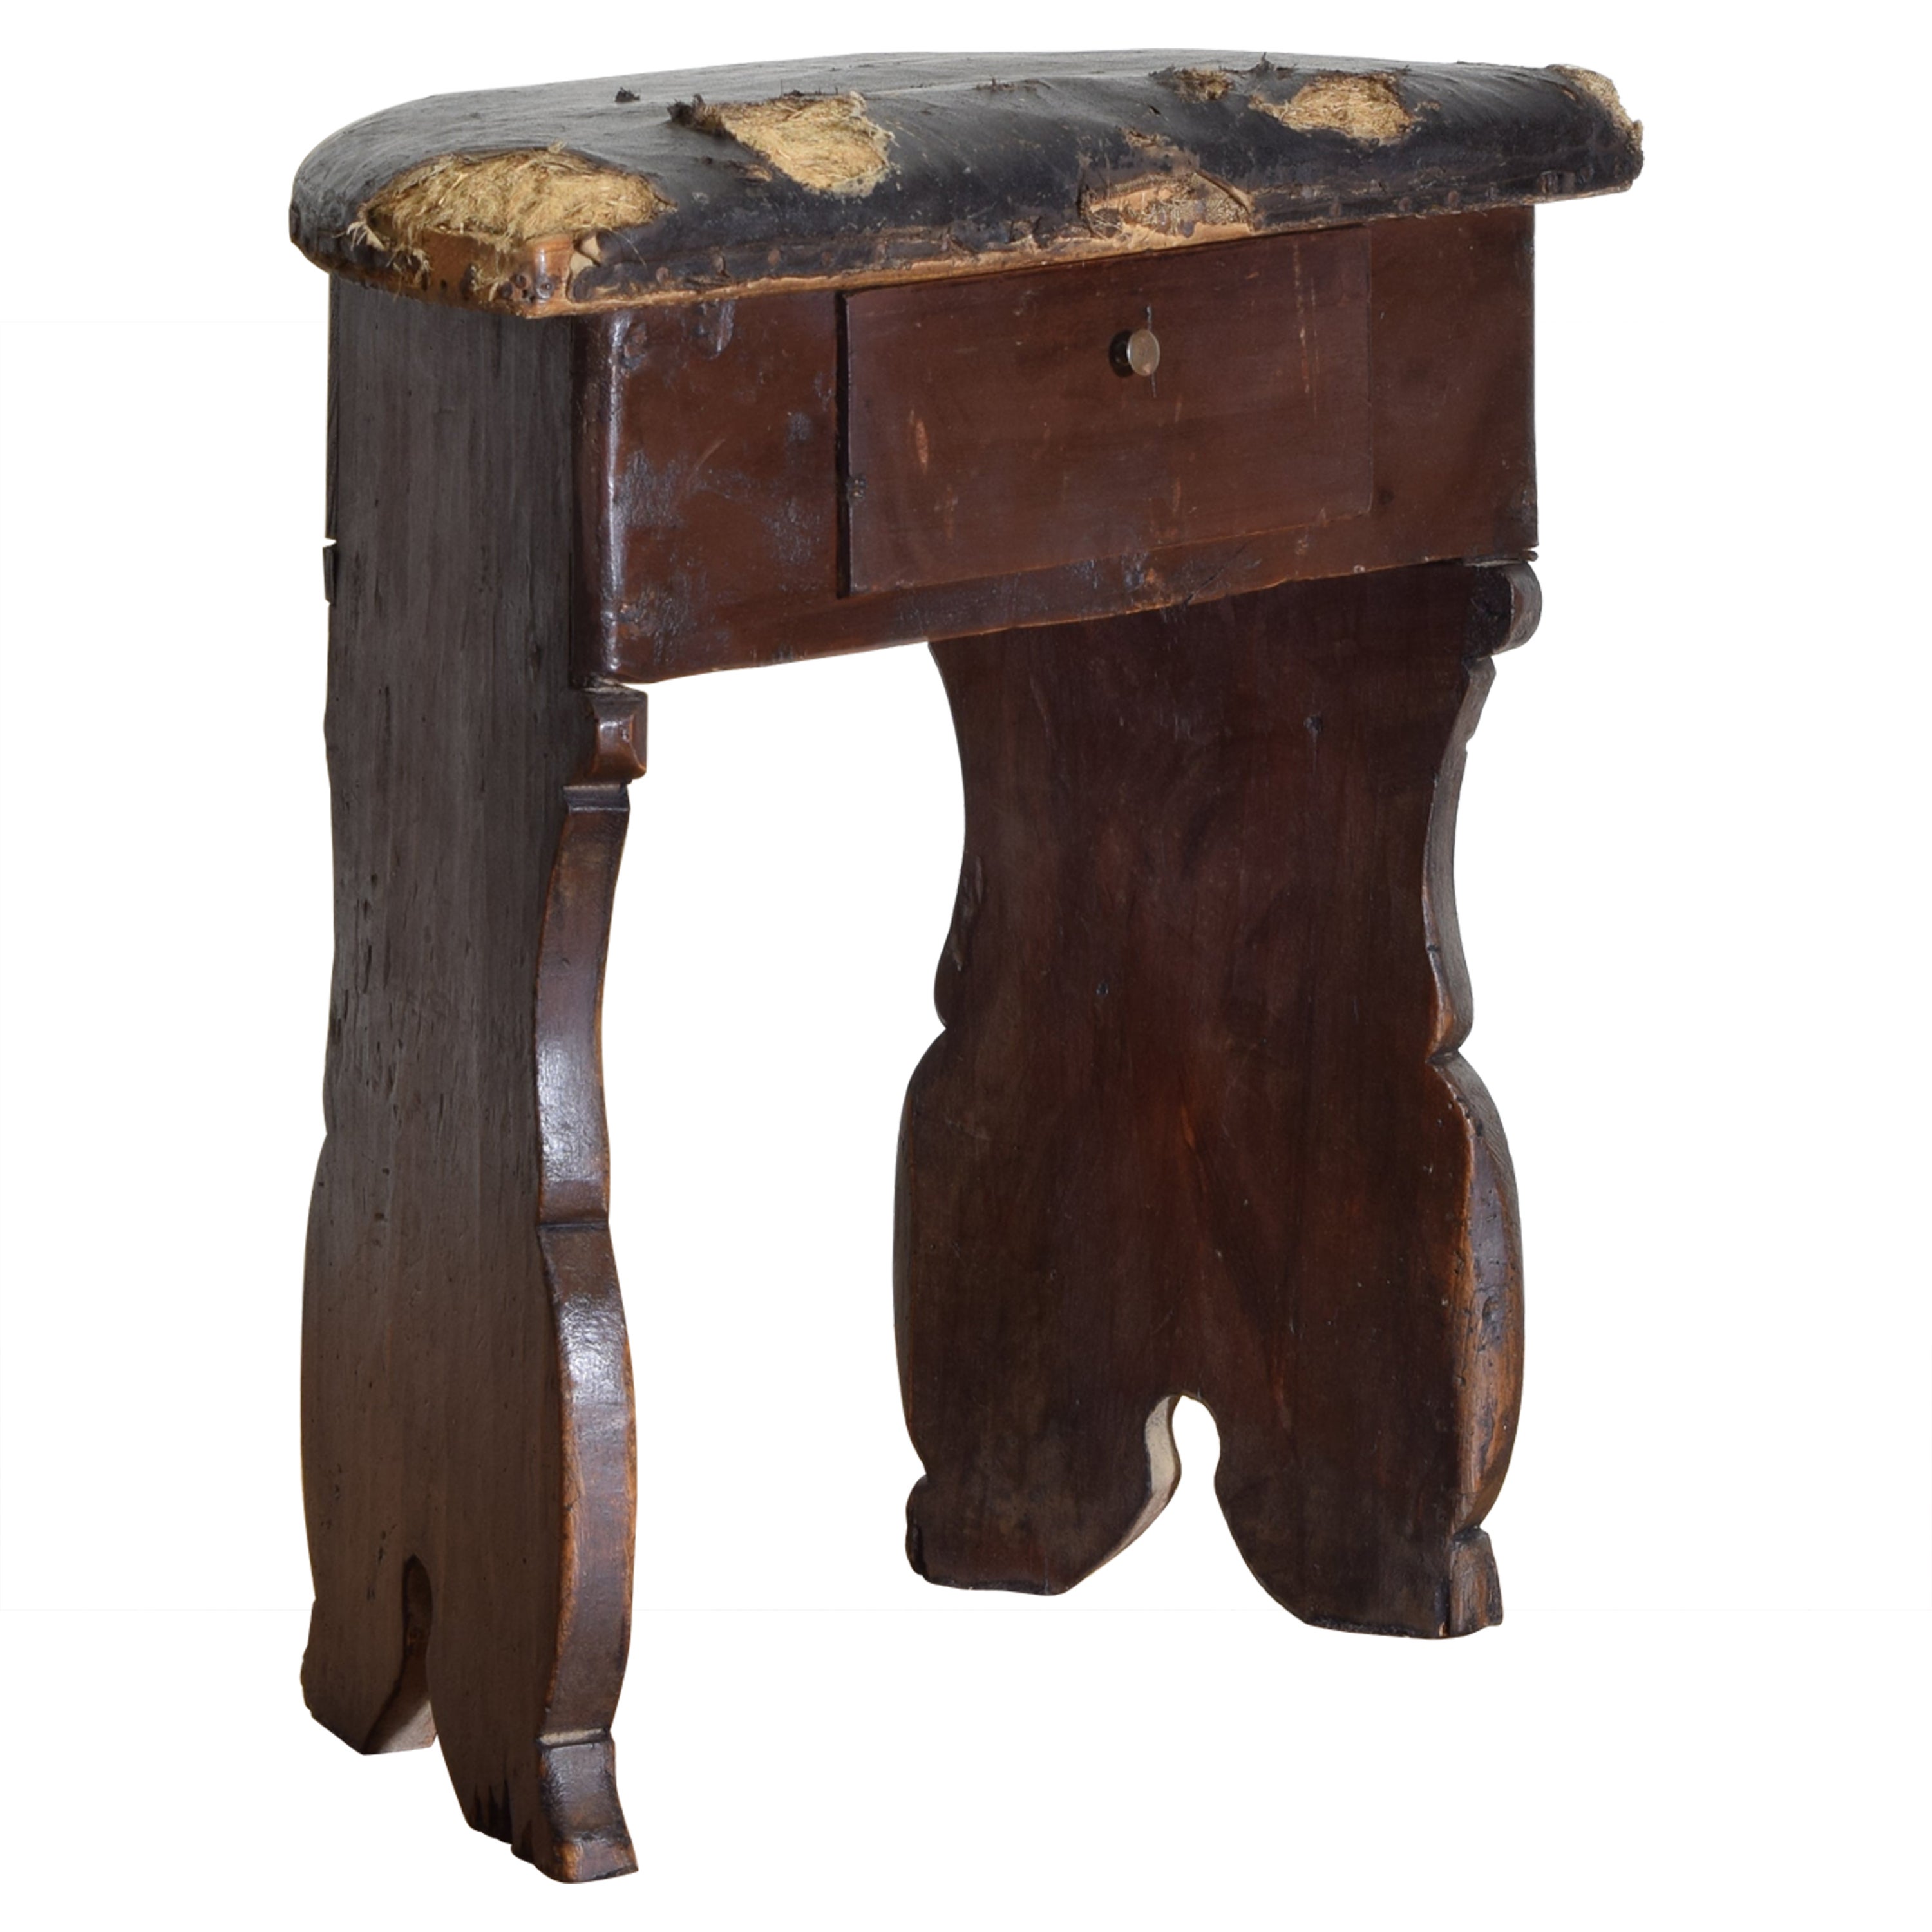 Northern Italian Baroque Painted Fir Wood 1-Drawer Confessional Bench, 17th Cen For Sale